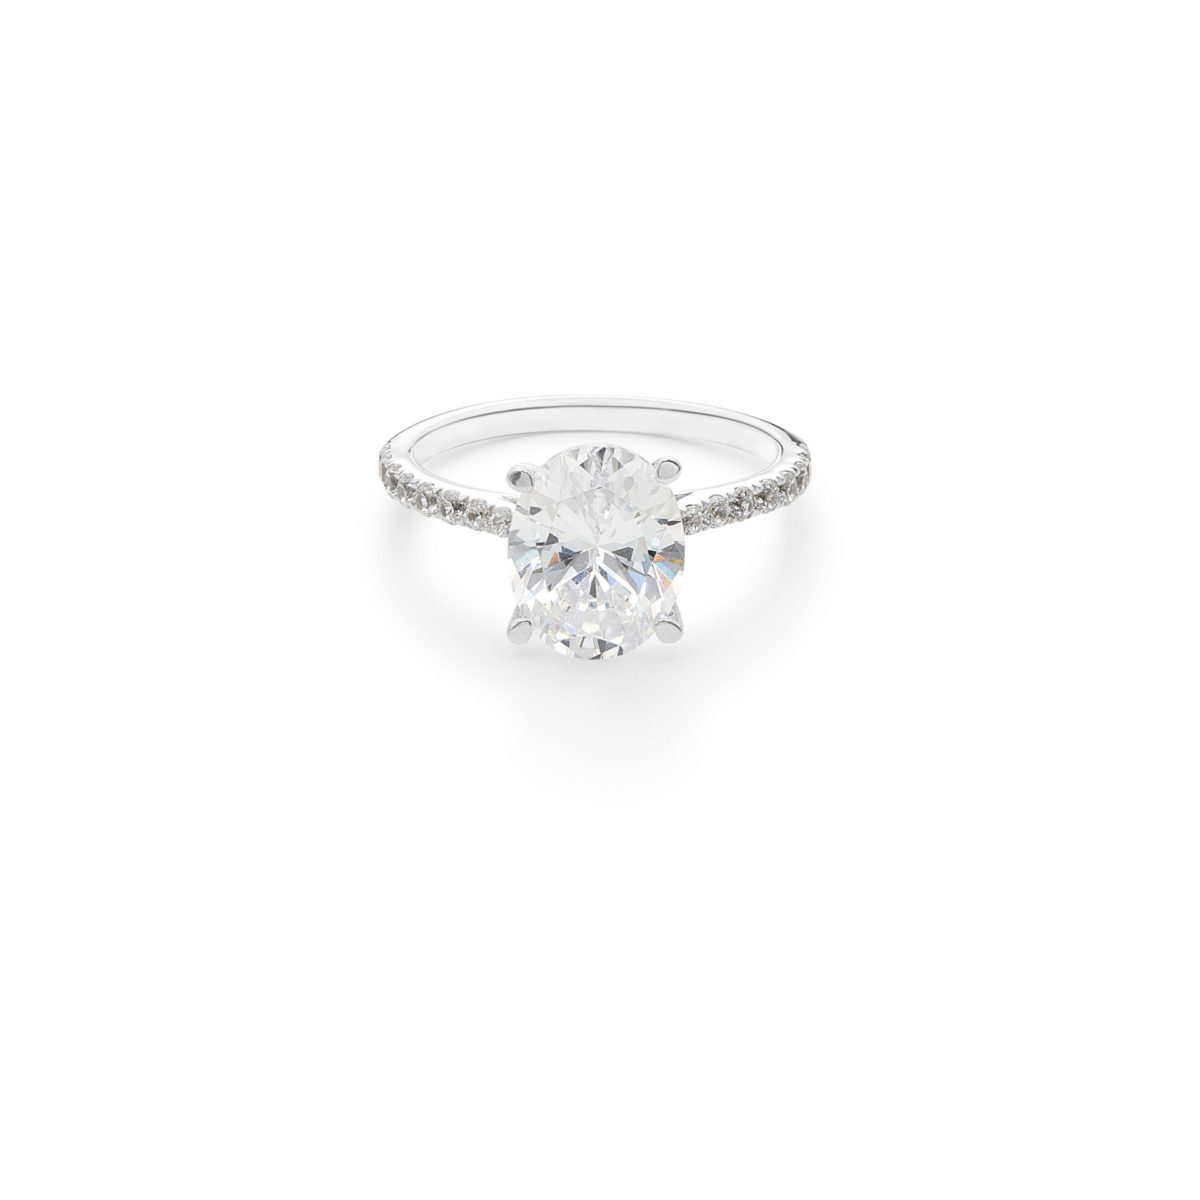 Keepers Collection Charlotte Engagement Ring - 4 Claw Oval Diamond with Skinny Pave Diamond Band